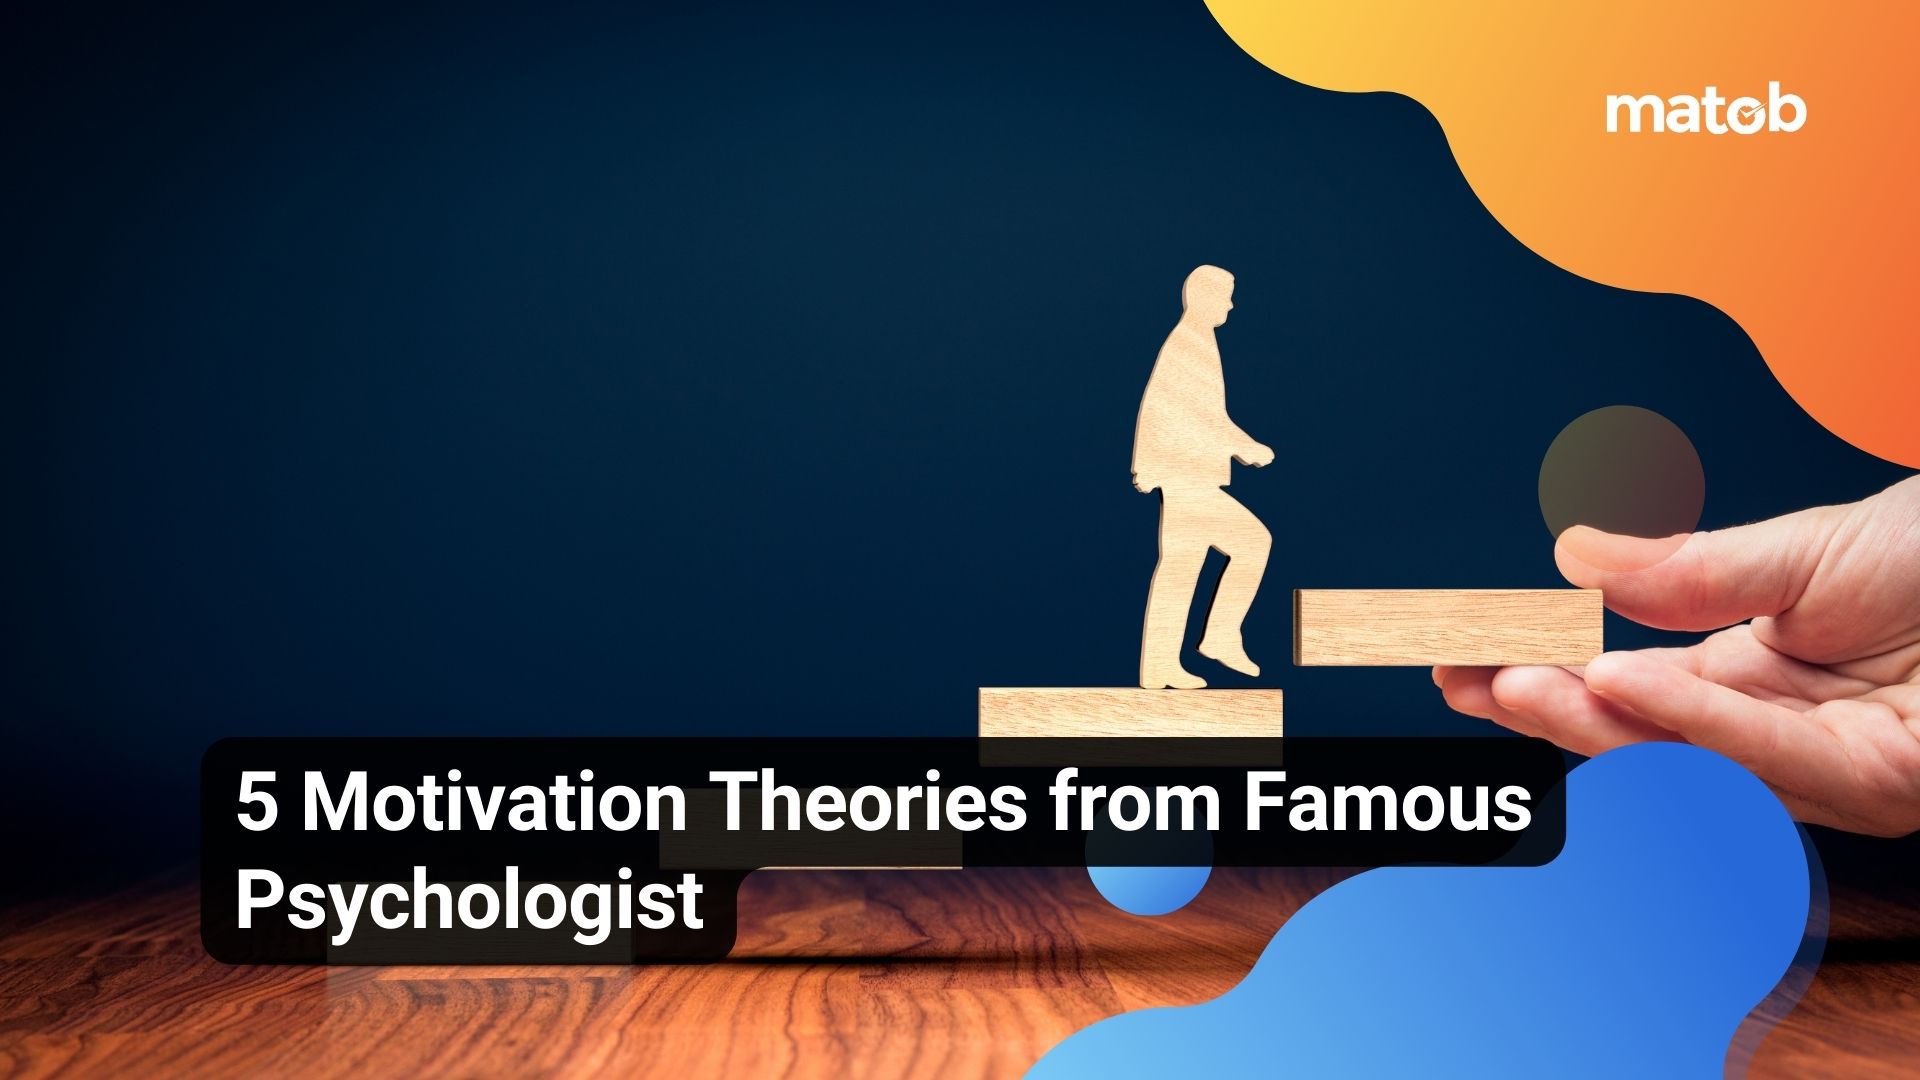 5 Motivation Theories from Famous Psychologist